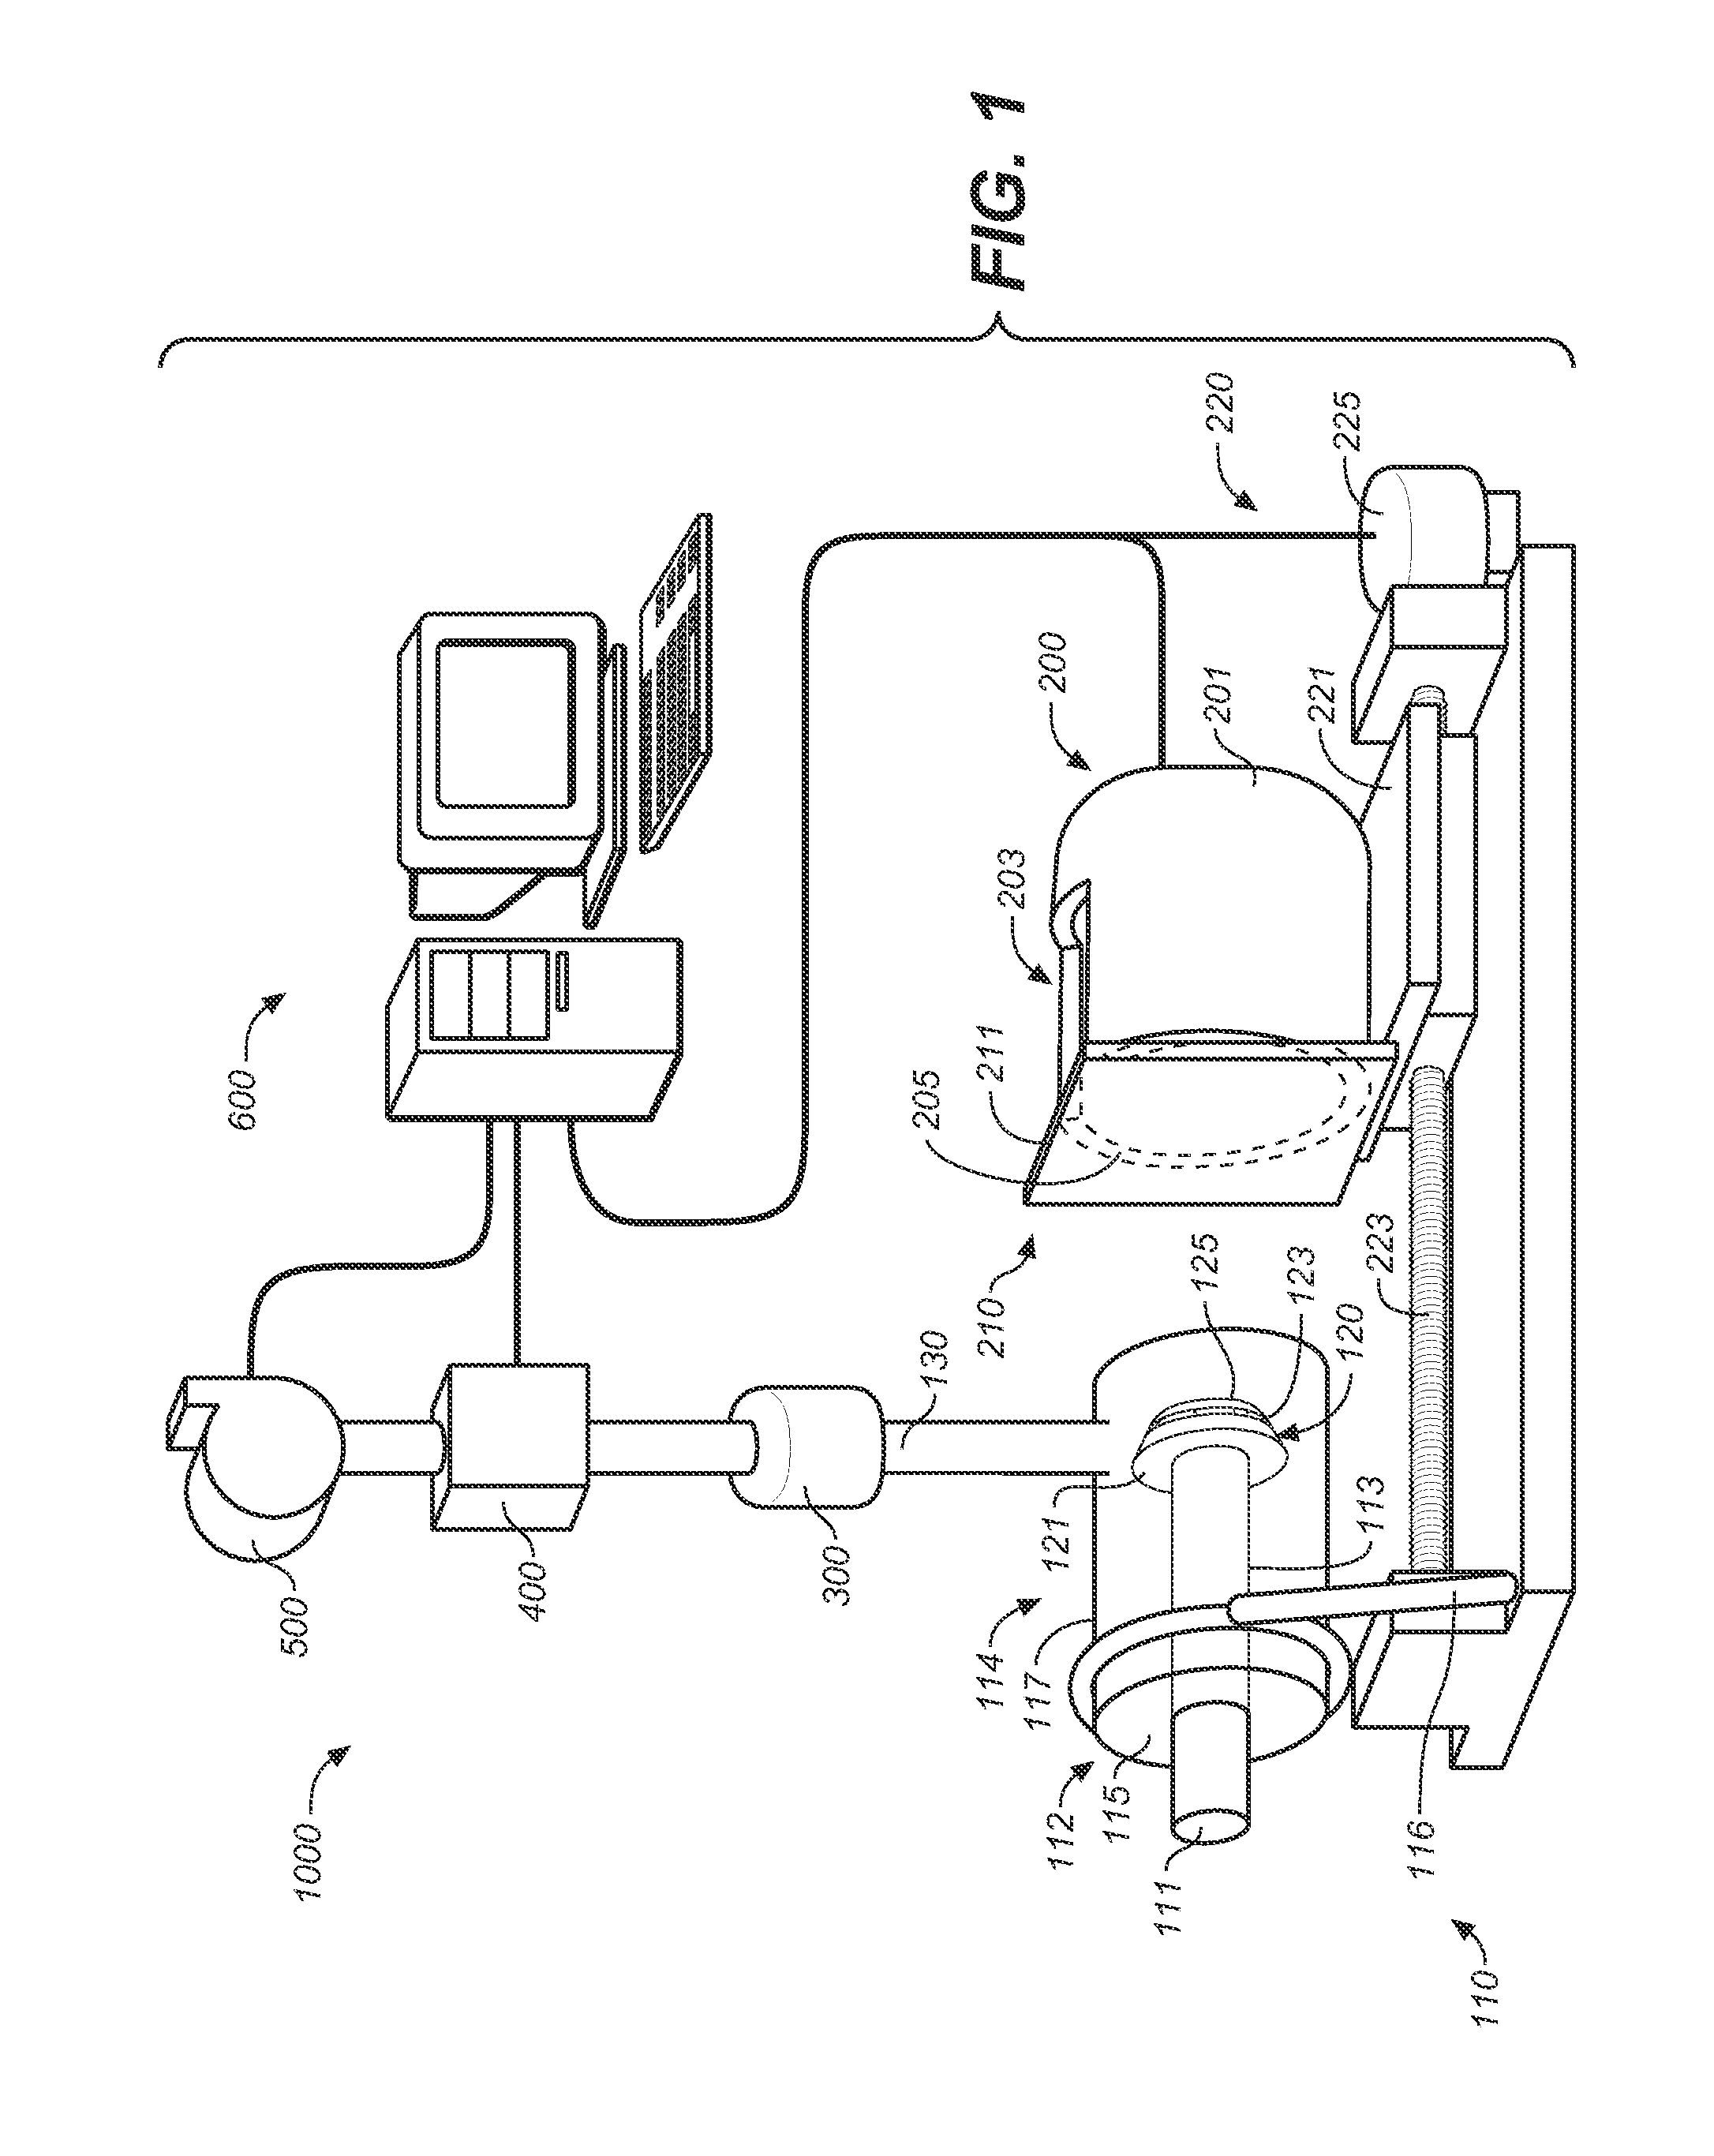 Method and analyzer for determining the content of carbon-containing particles filtered from an air stream